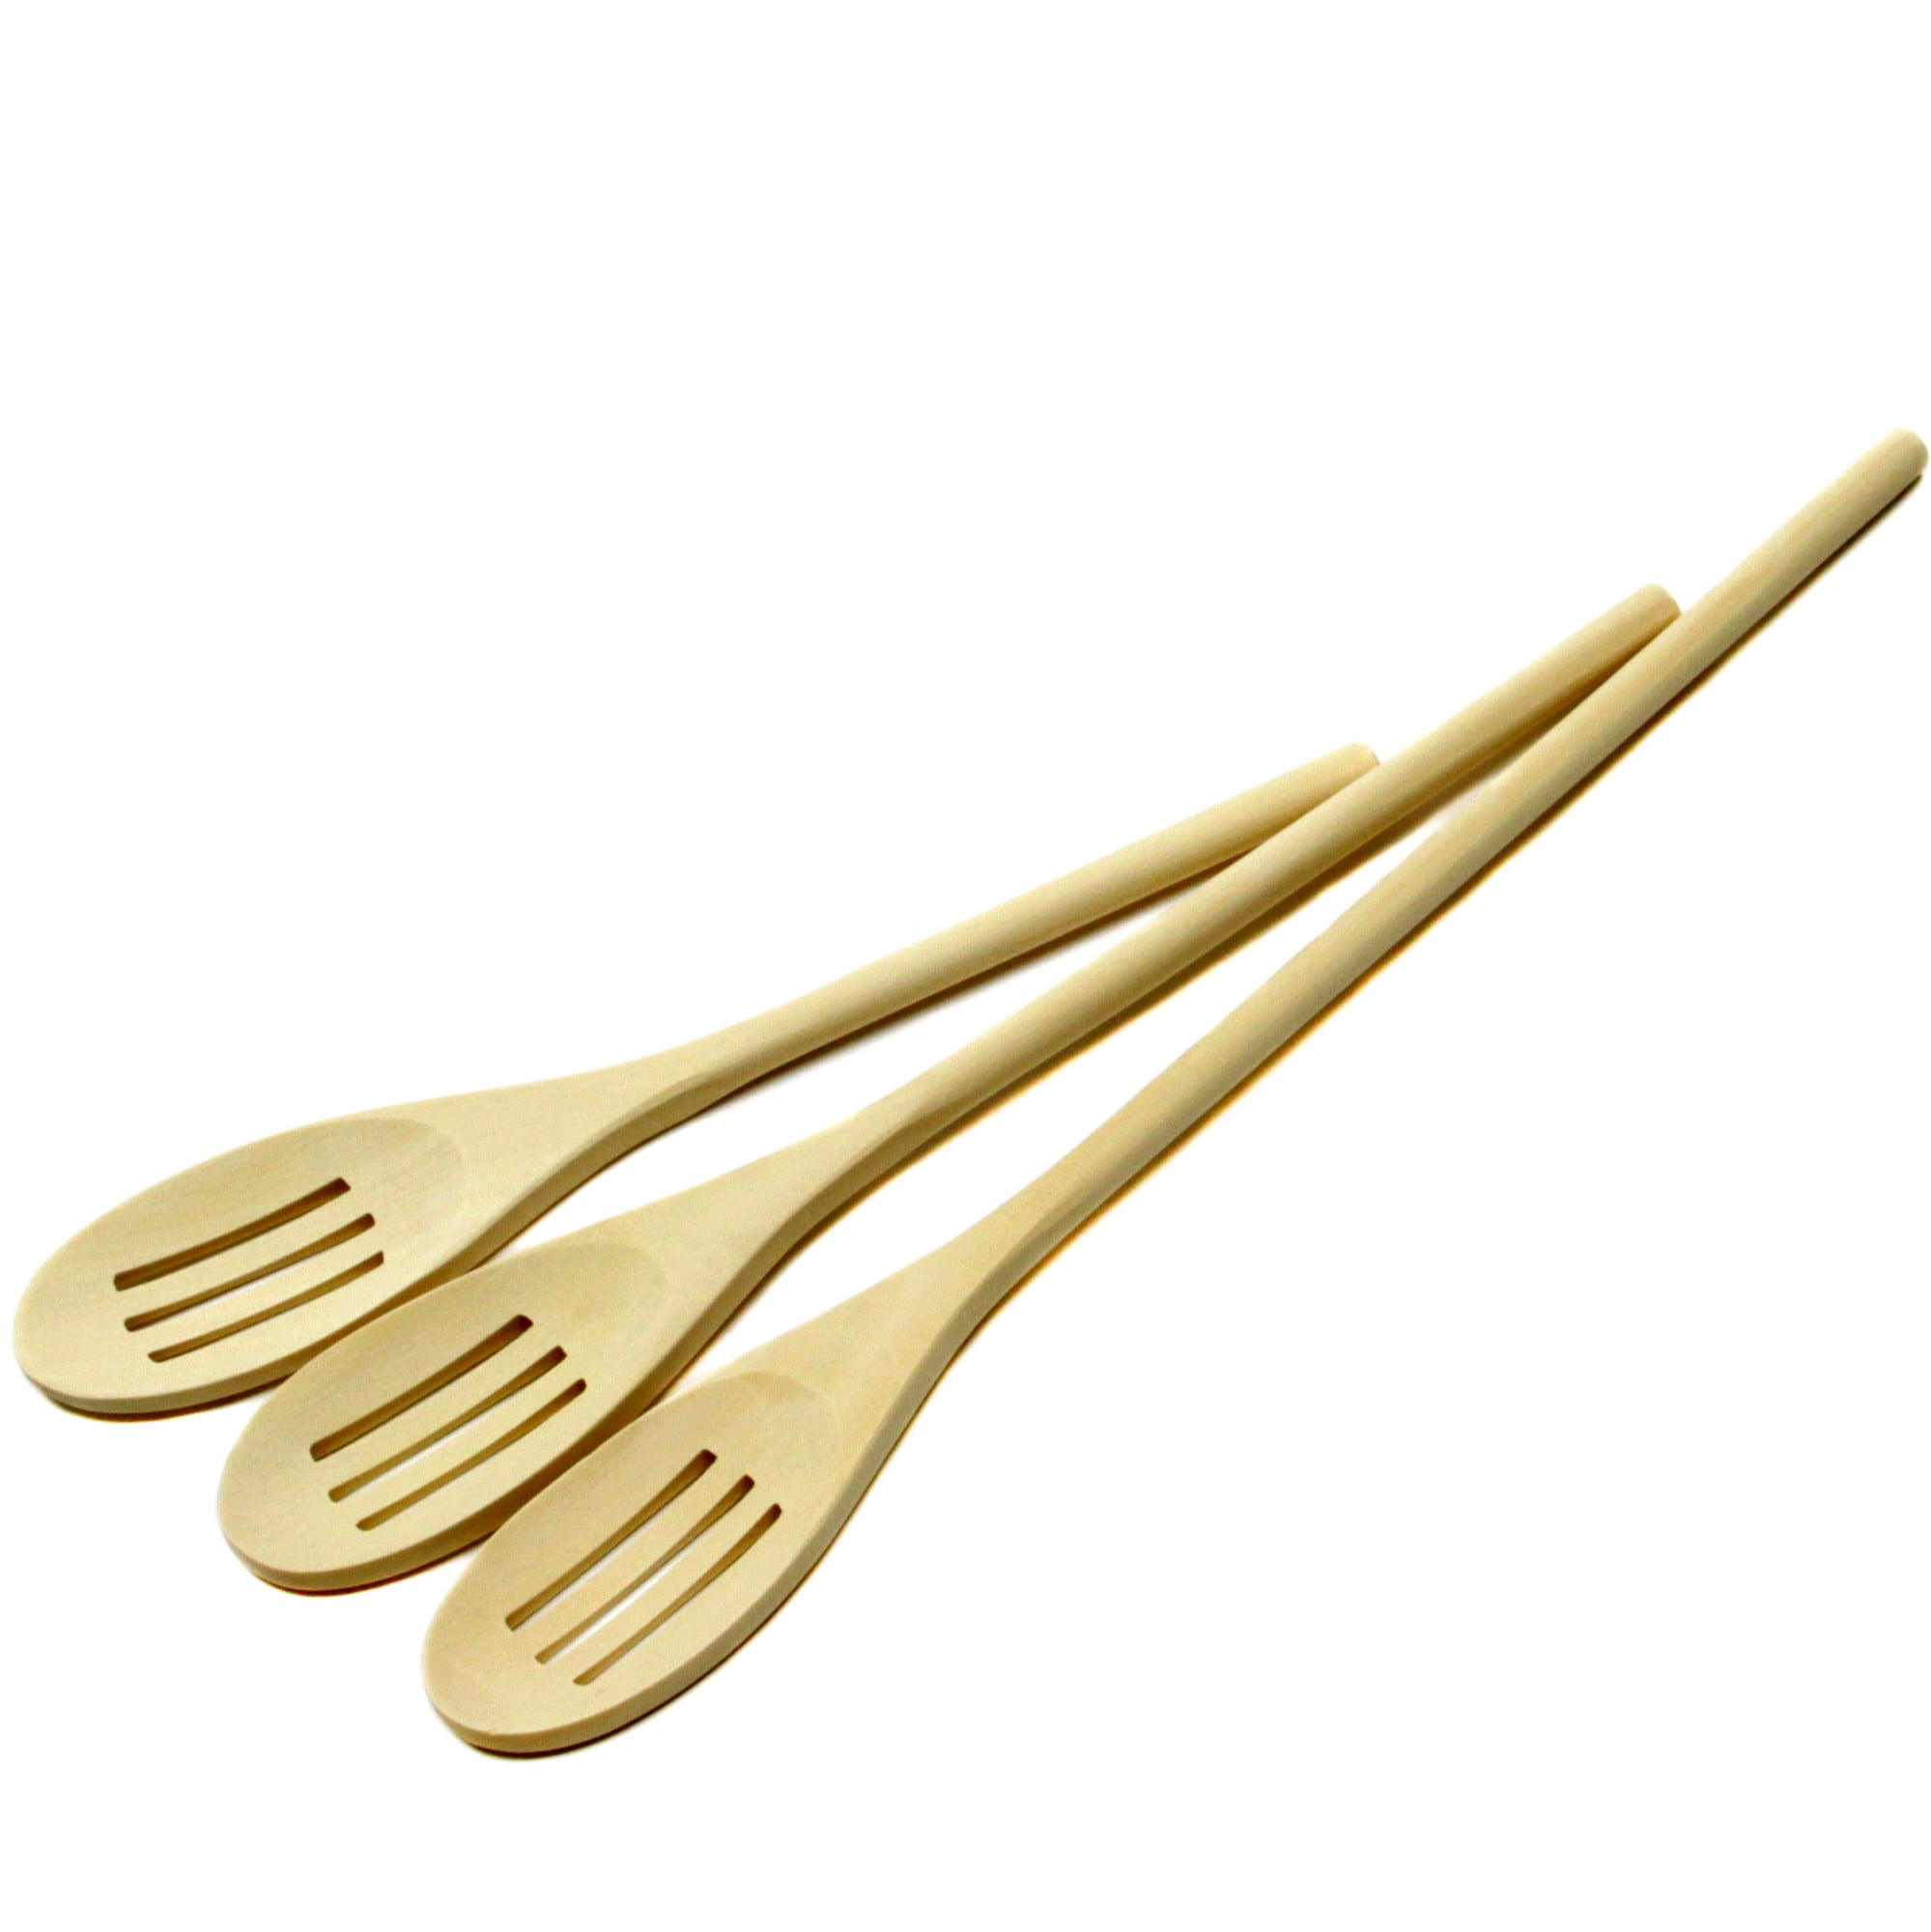 2288791 Slotted Wooden Spoon Set - 3 Piece & Case Of 144